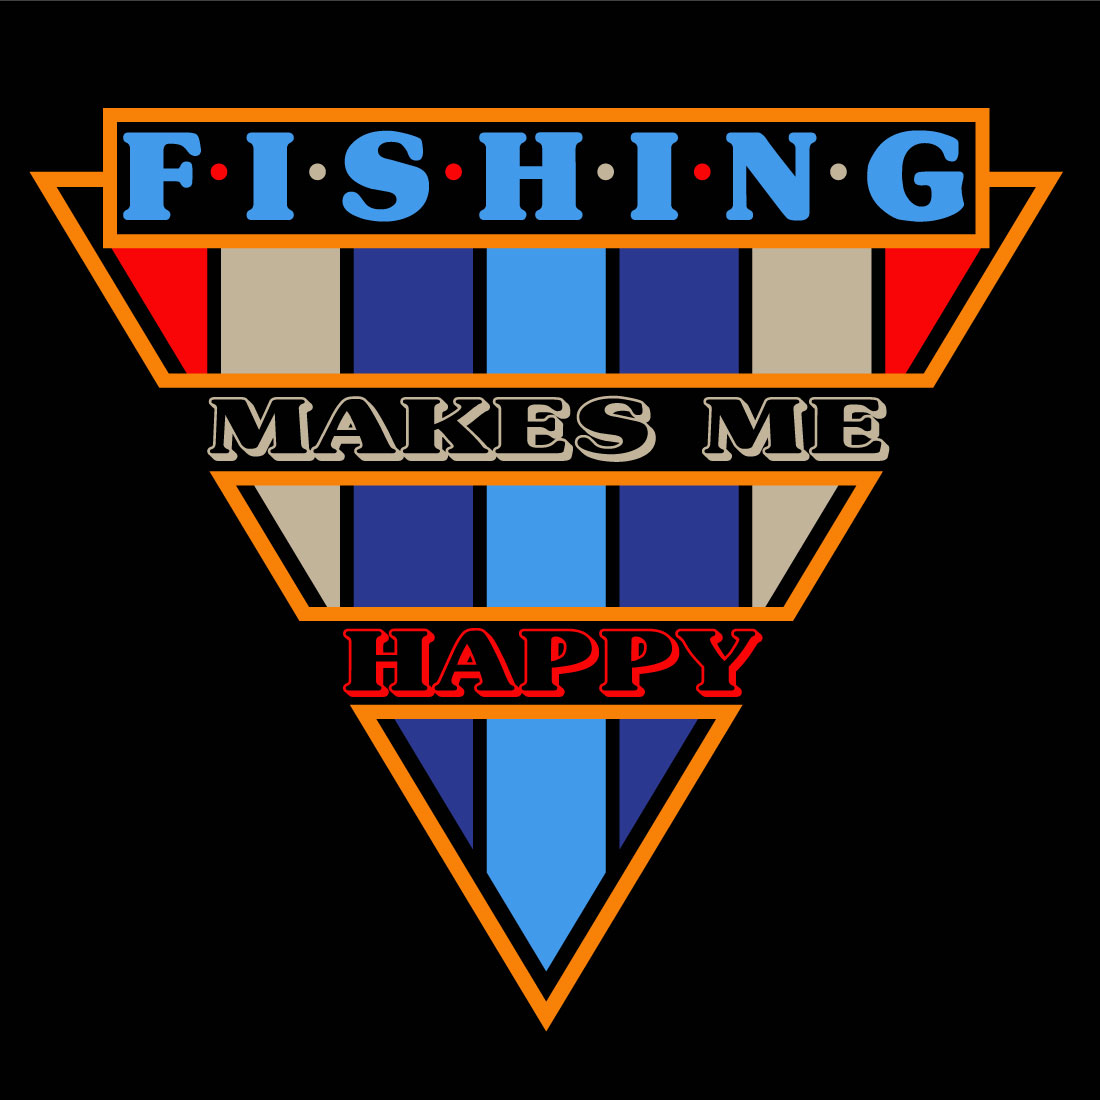 Fishing makes me happy typography t-shirt design cover image.